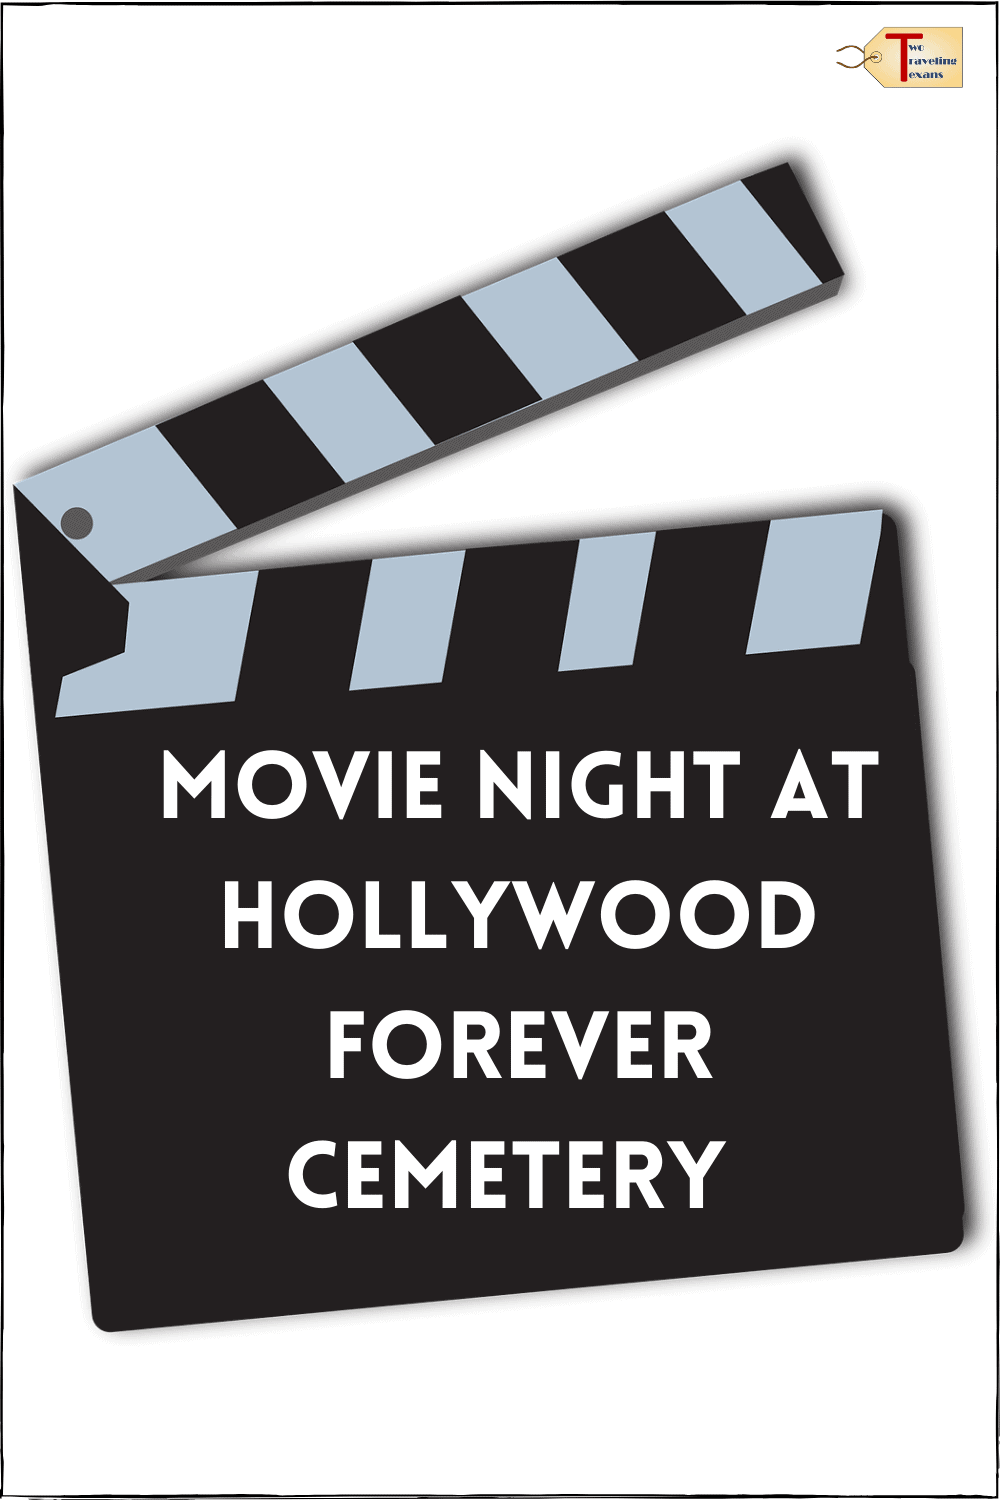 clap board with text "movie night at hollywood forever cemetery"